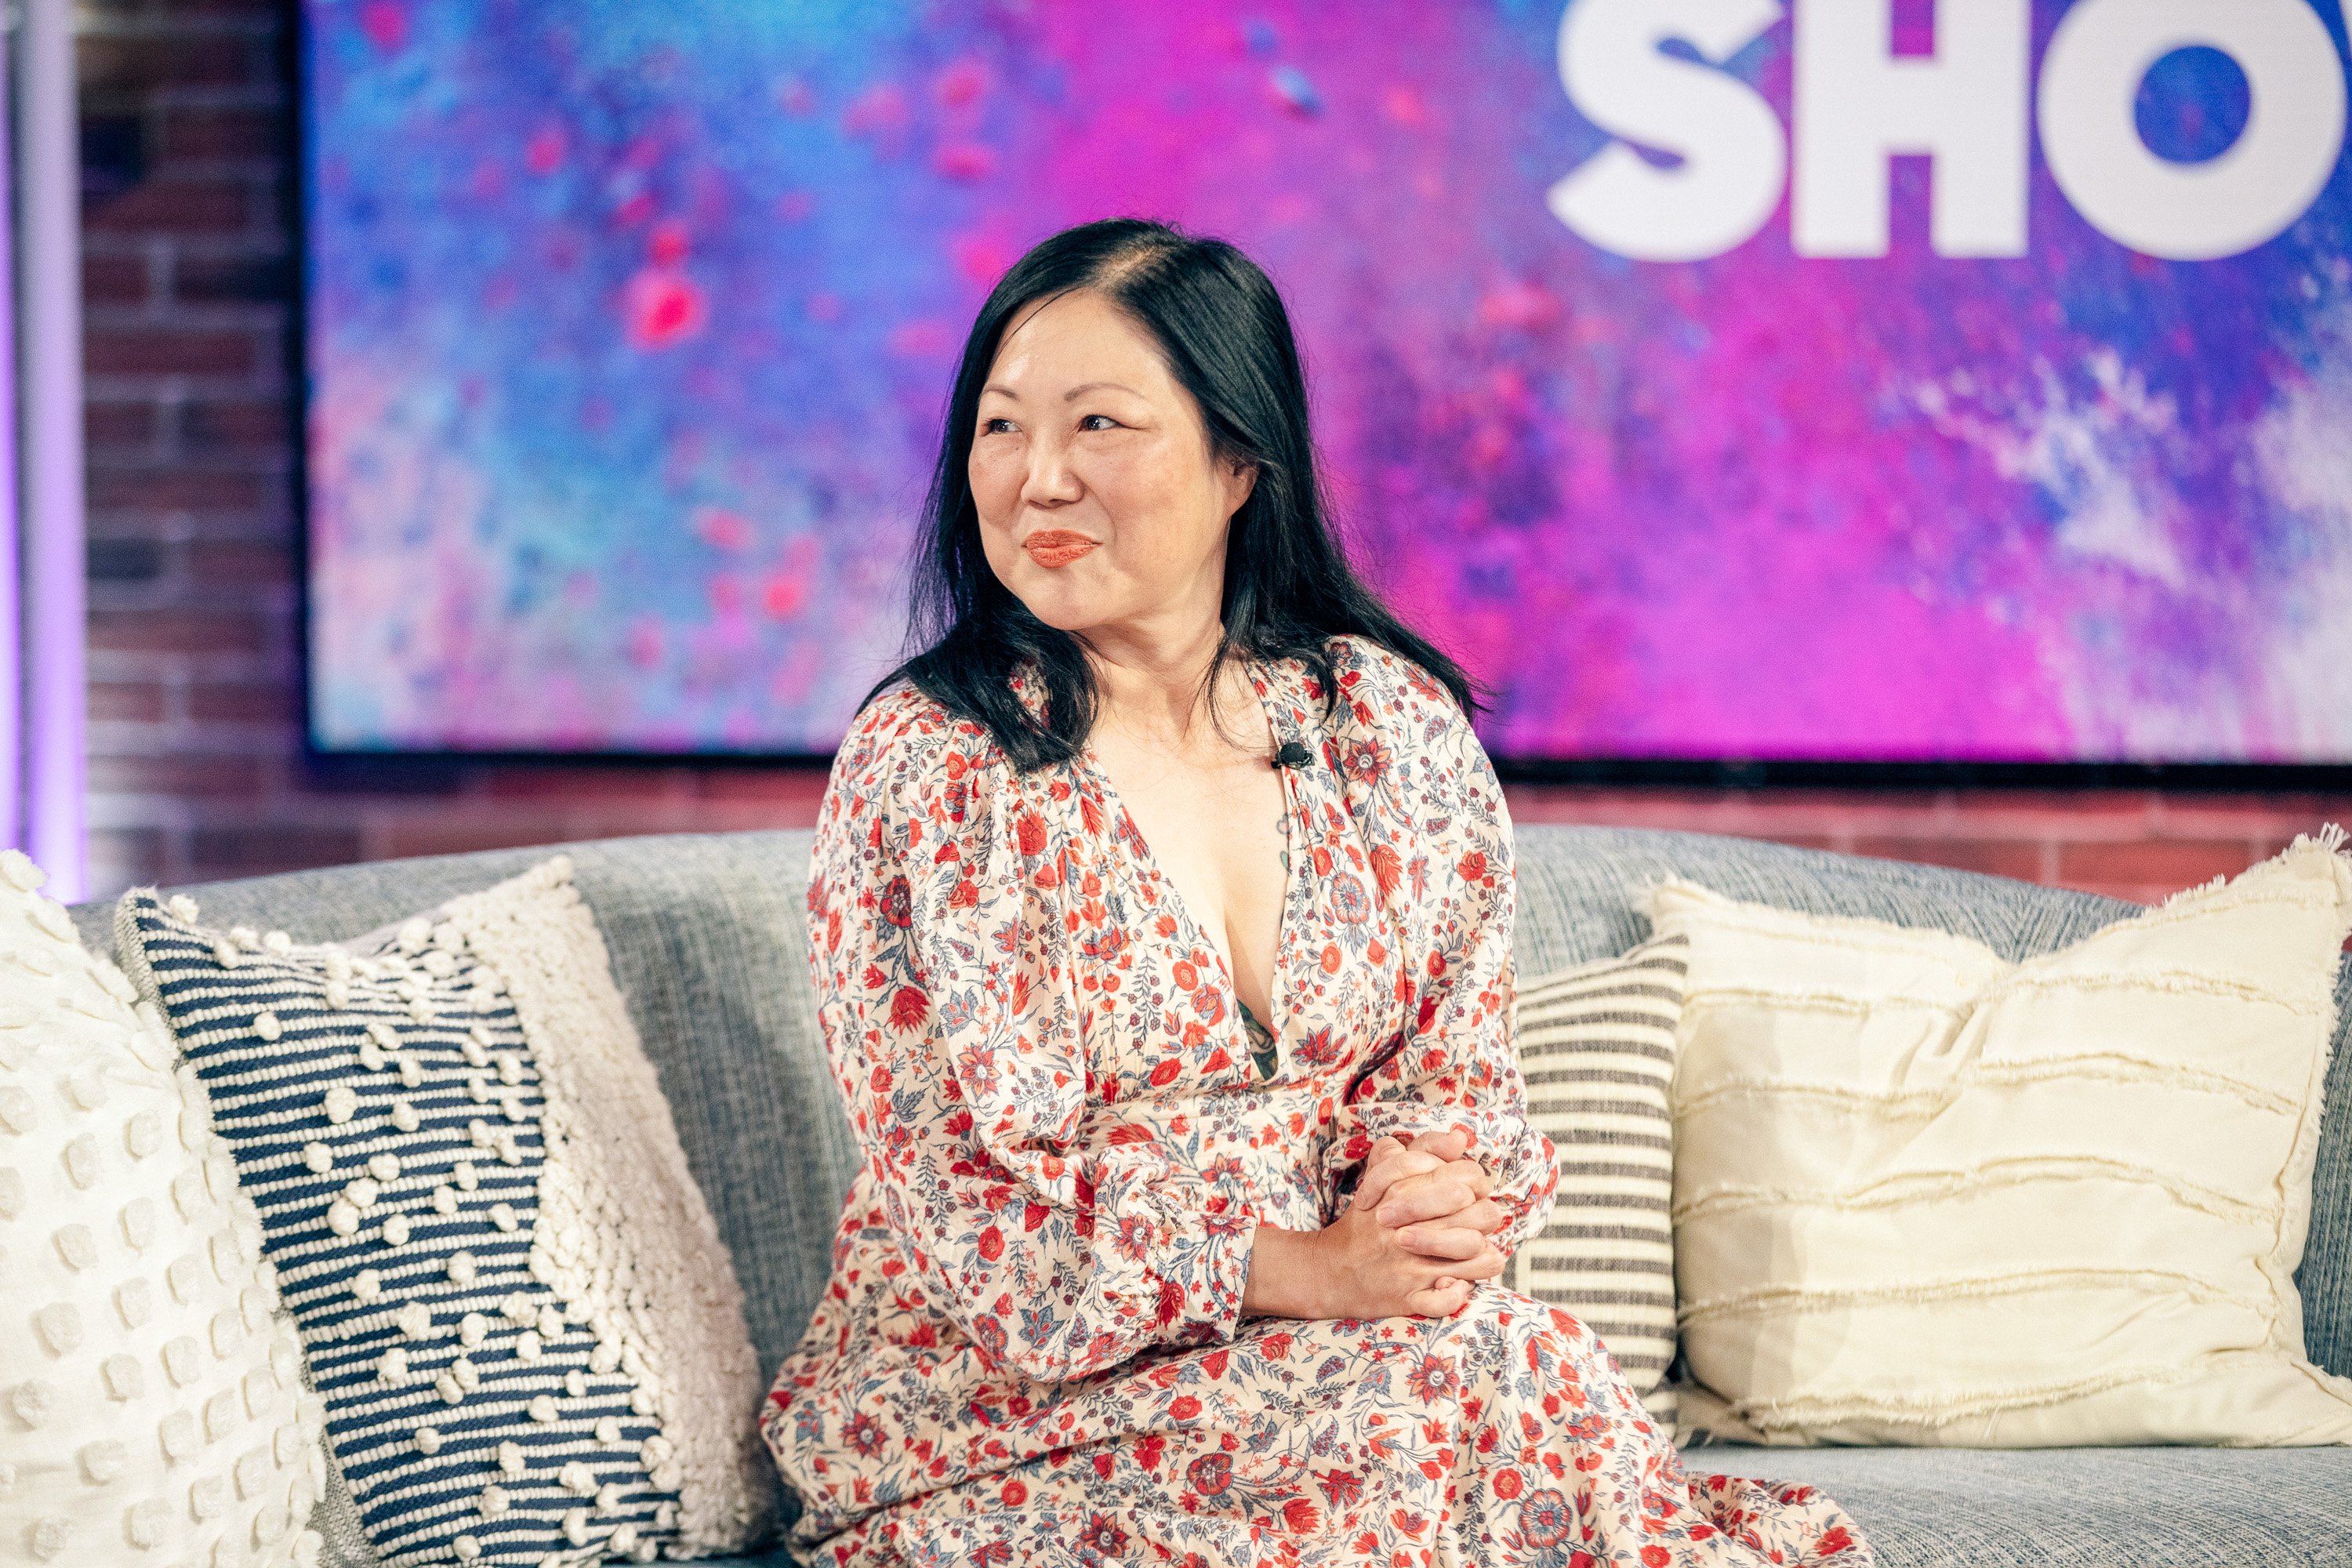 Actress and comedienne Margaret Cho during an appearance on "The Kelly Clarkson Show" Season 3.┃Source: Getty Images